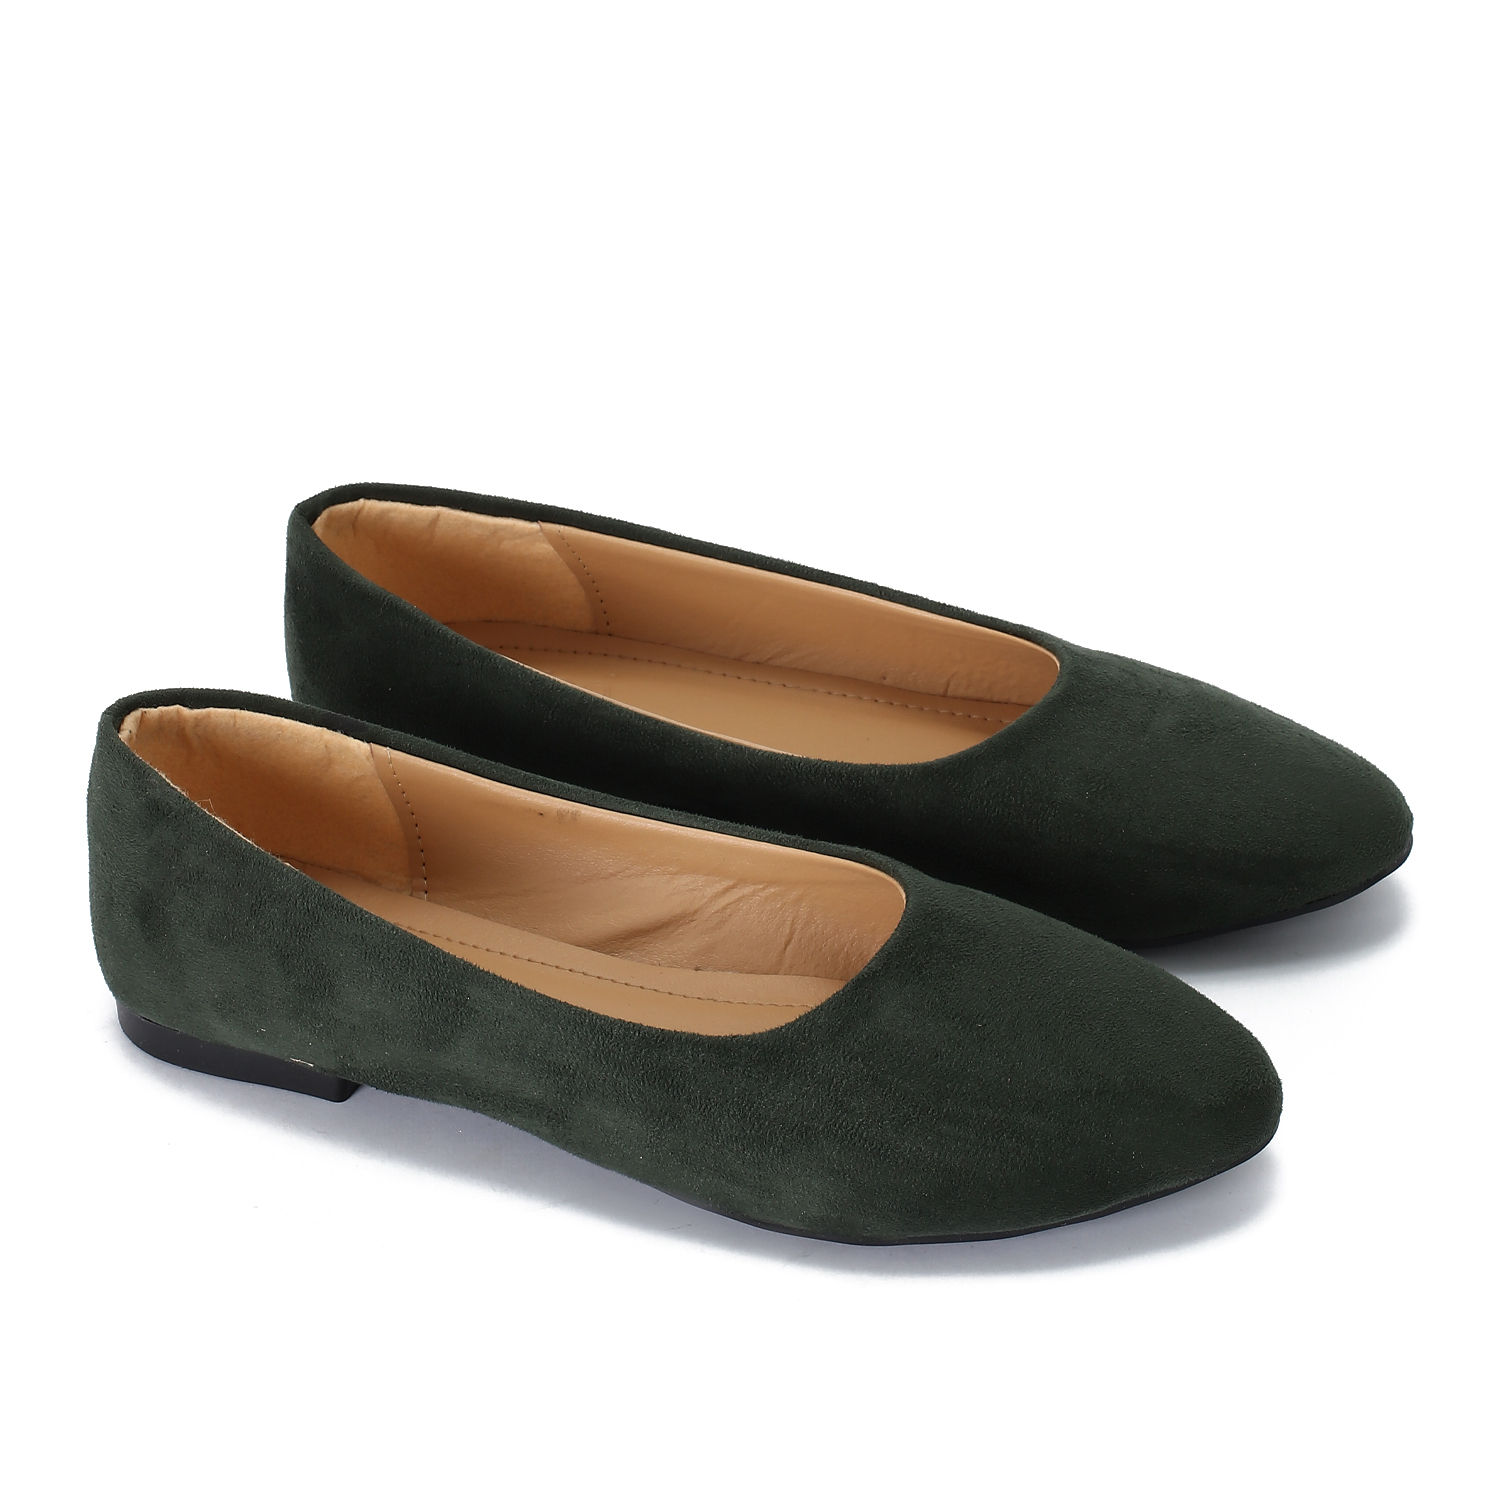 Olive Suede Ballerinas - Trust Group Stores